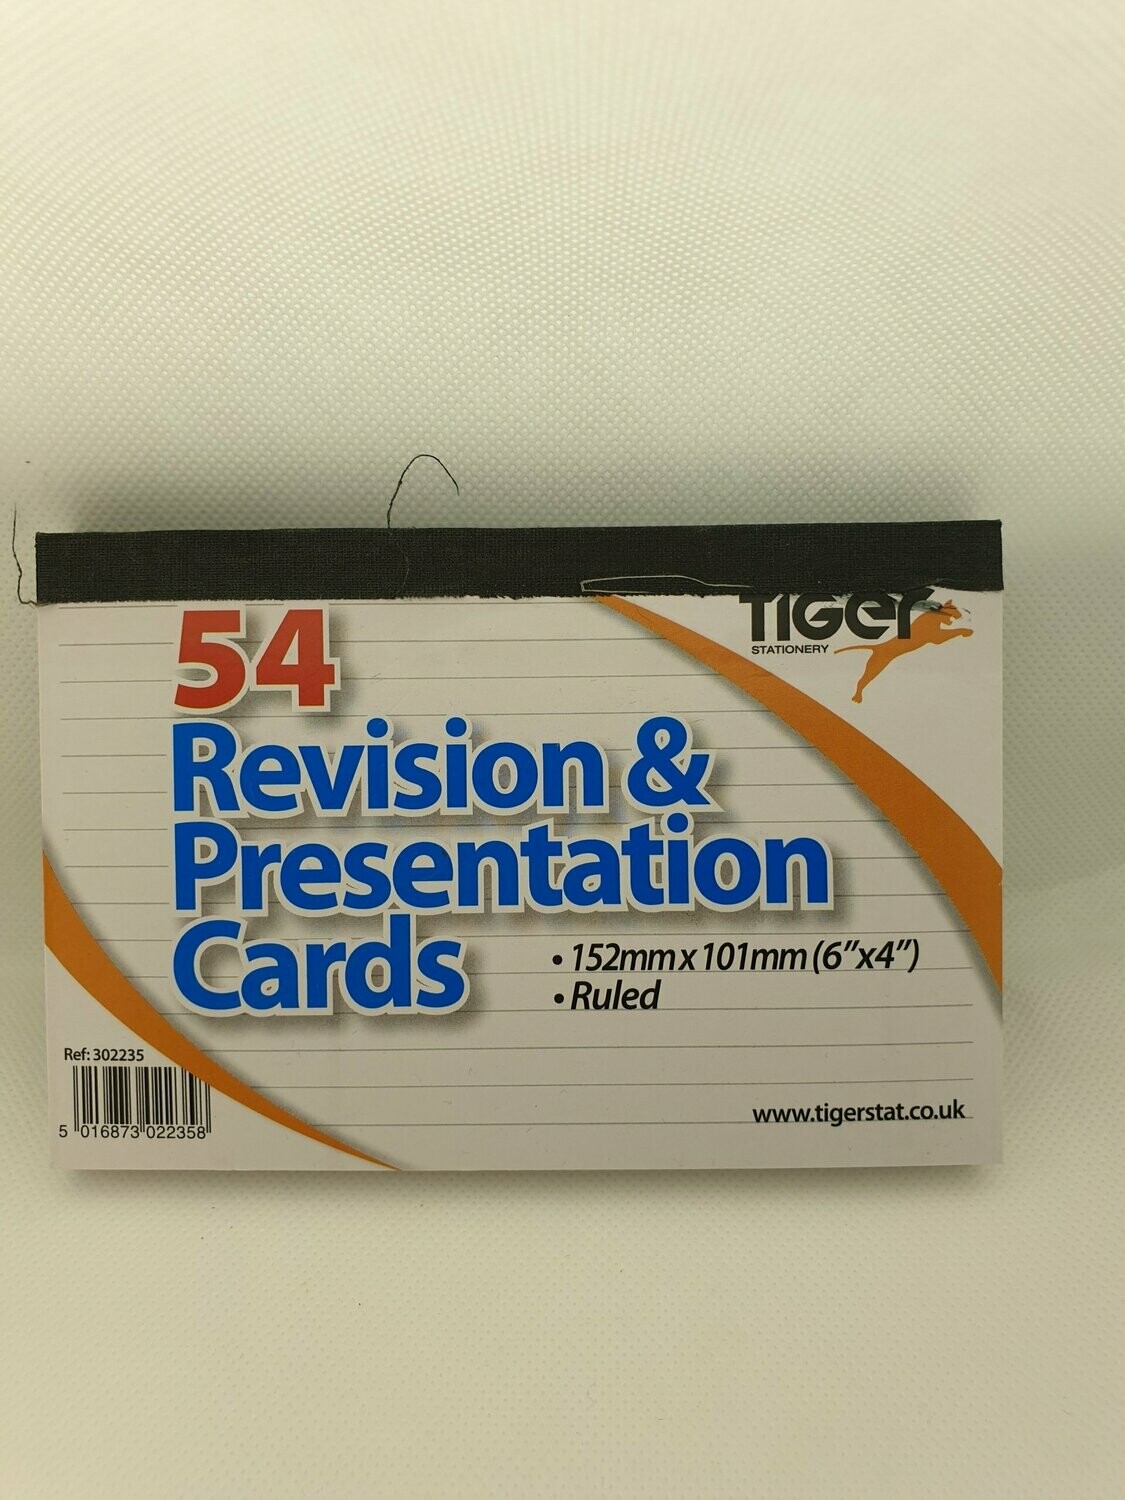 Revision Cards